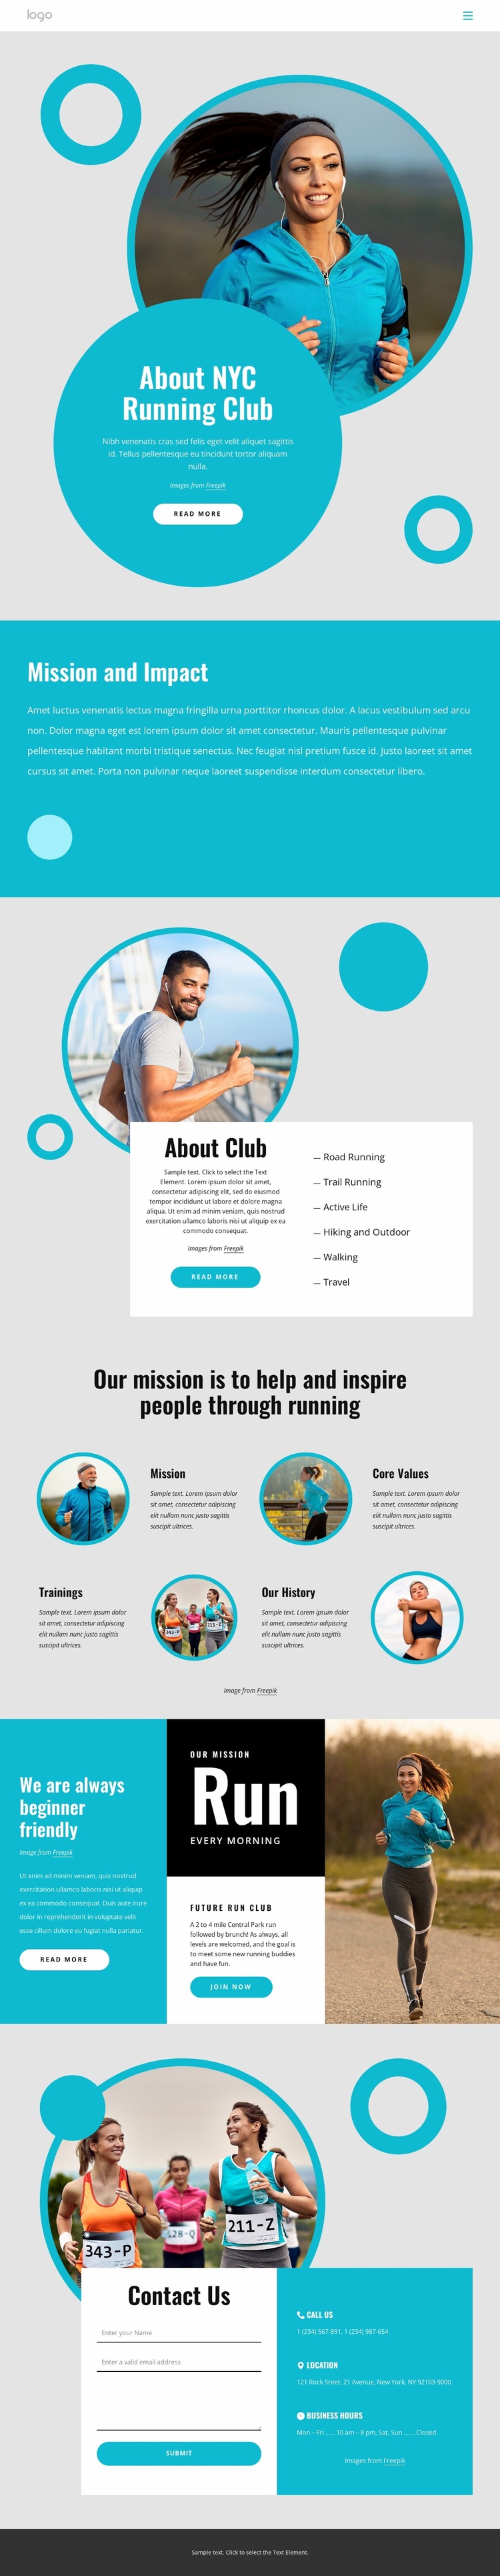 About NYC running club Website Design